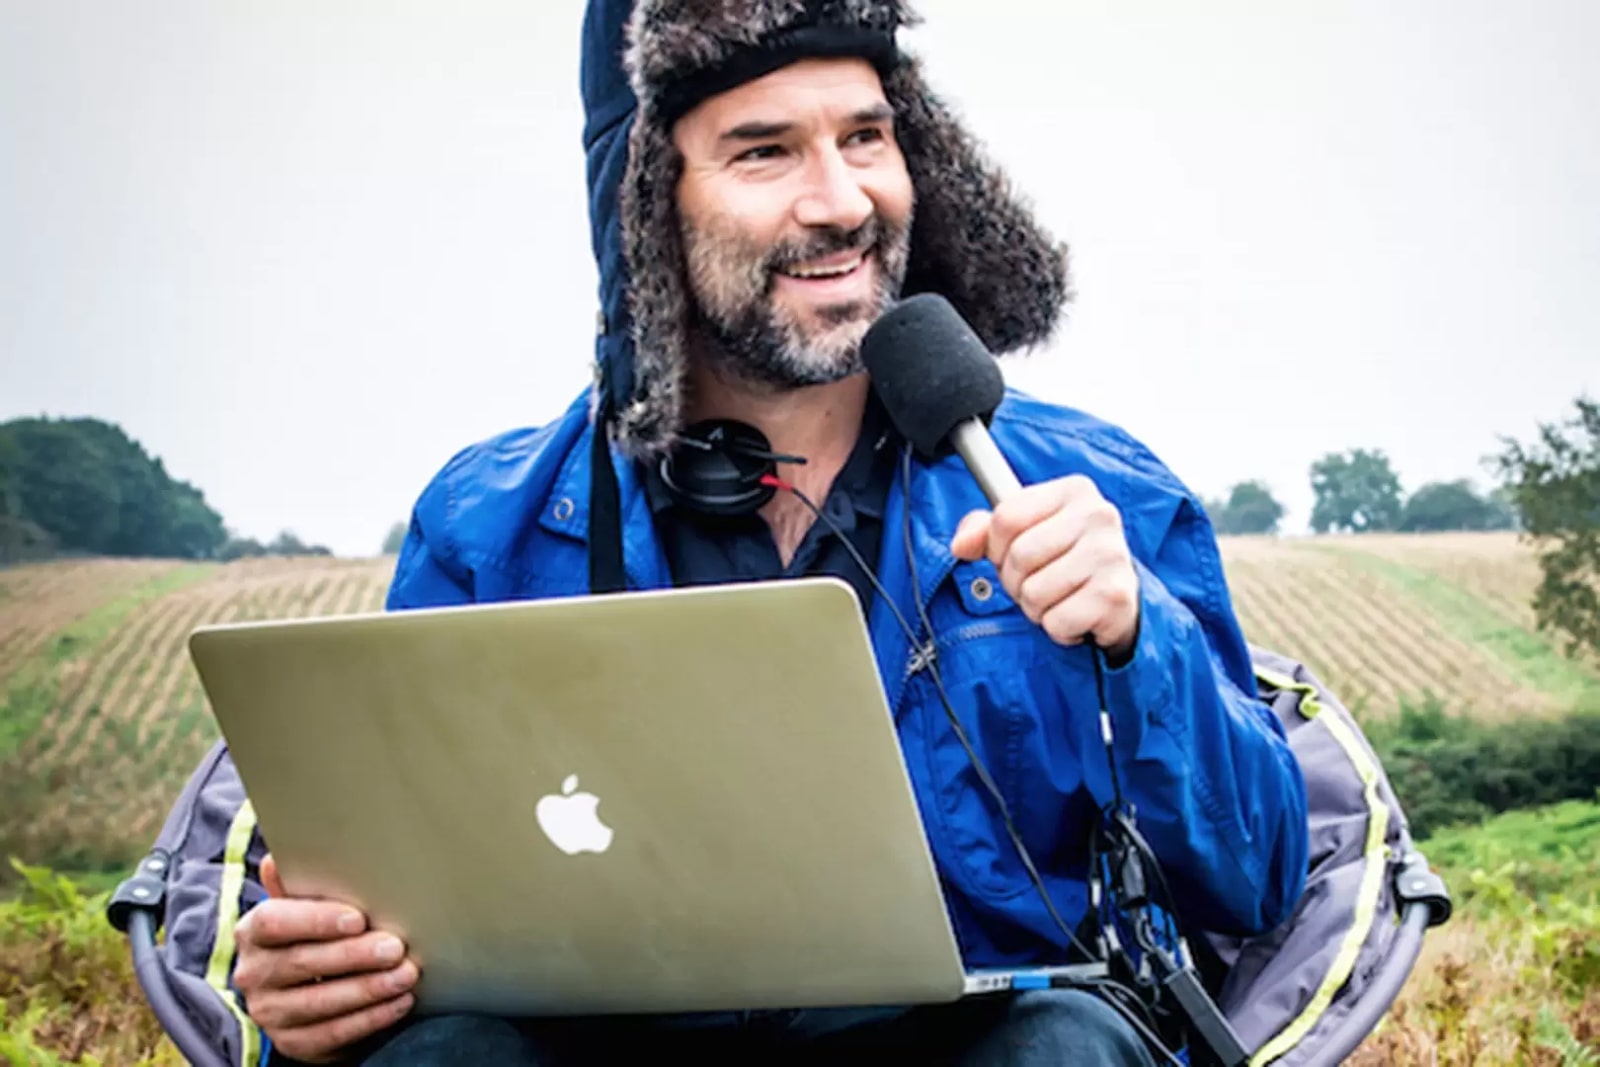 The interview podcast - The Adam Buxton podcast